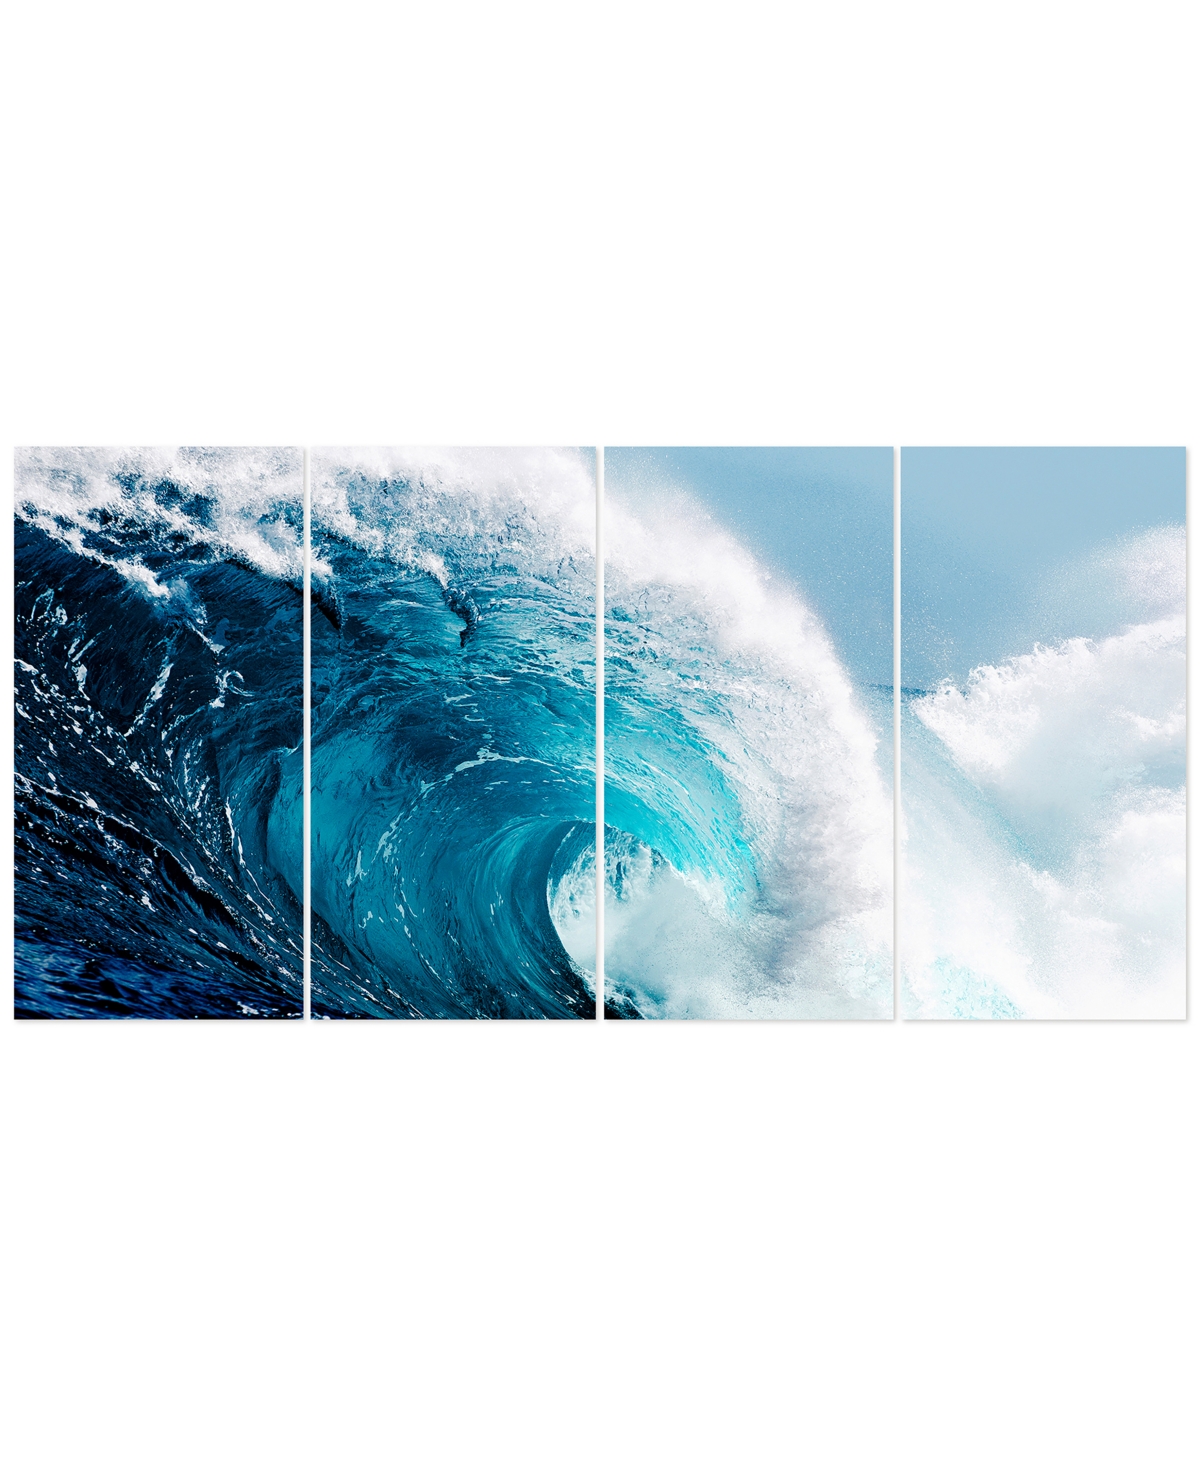 Empire Art Direct Blue Wave Abcd Frameless Free Floating Tempered Glass Panel Graphic Wall Art, 72" X 36" X 0.2" Each